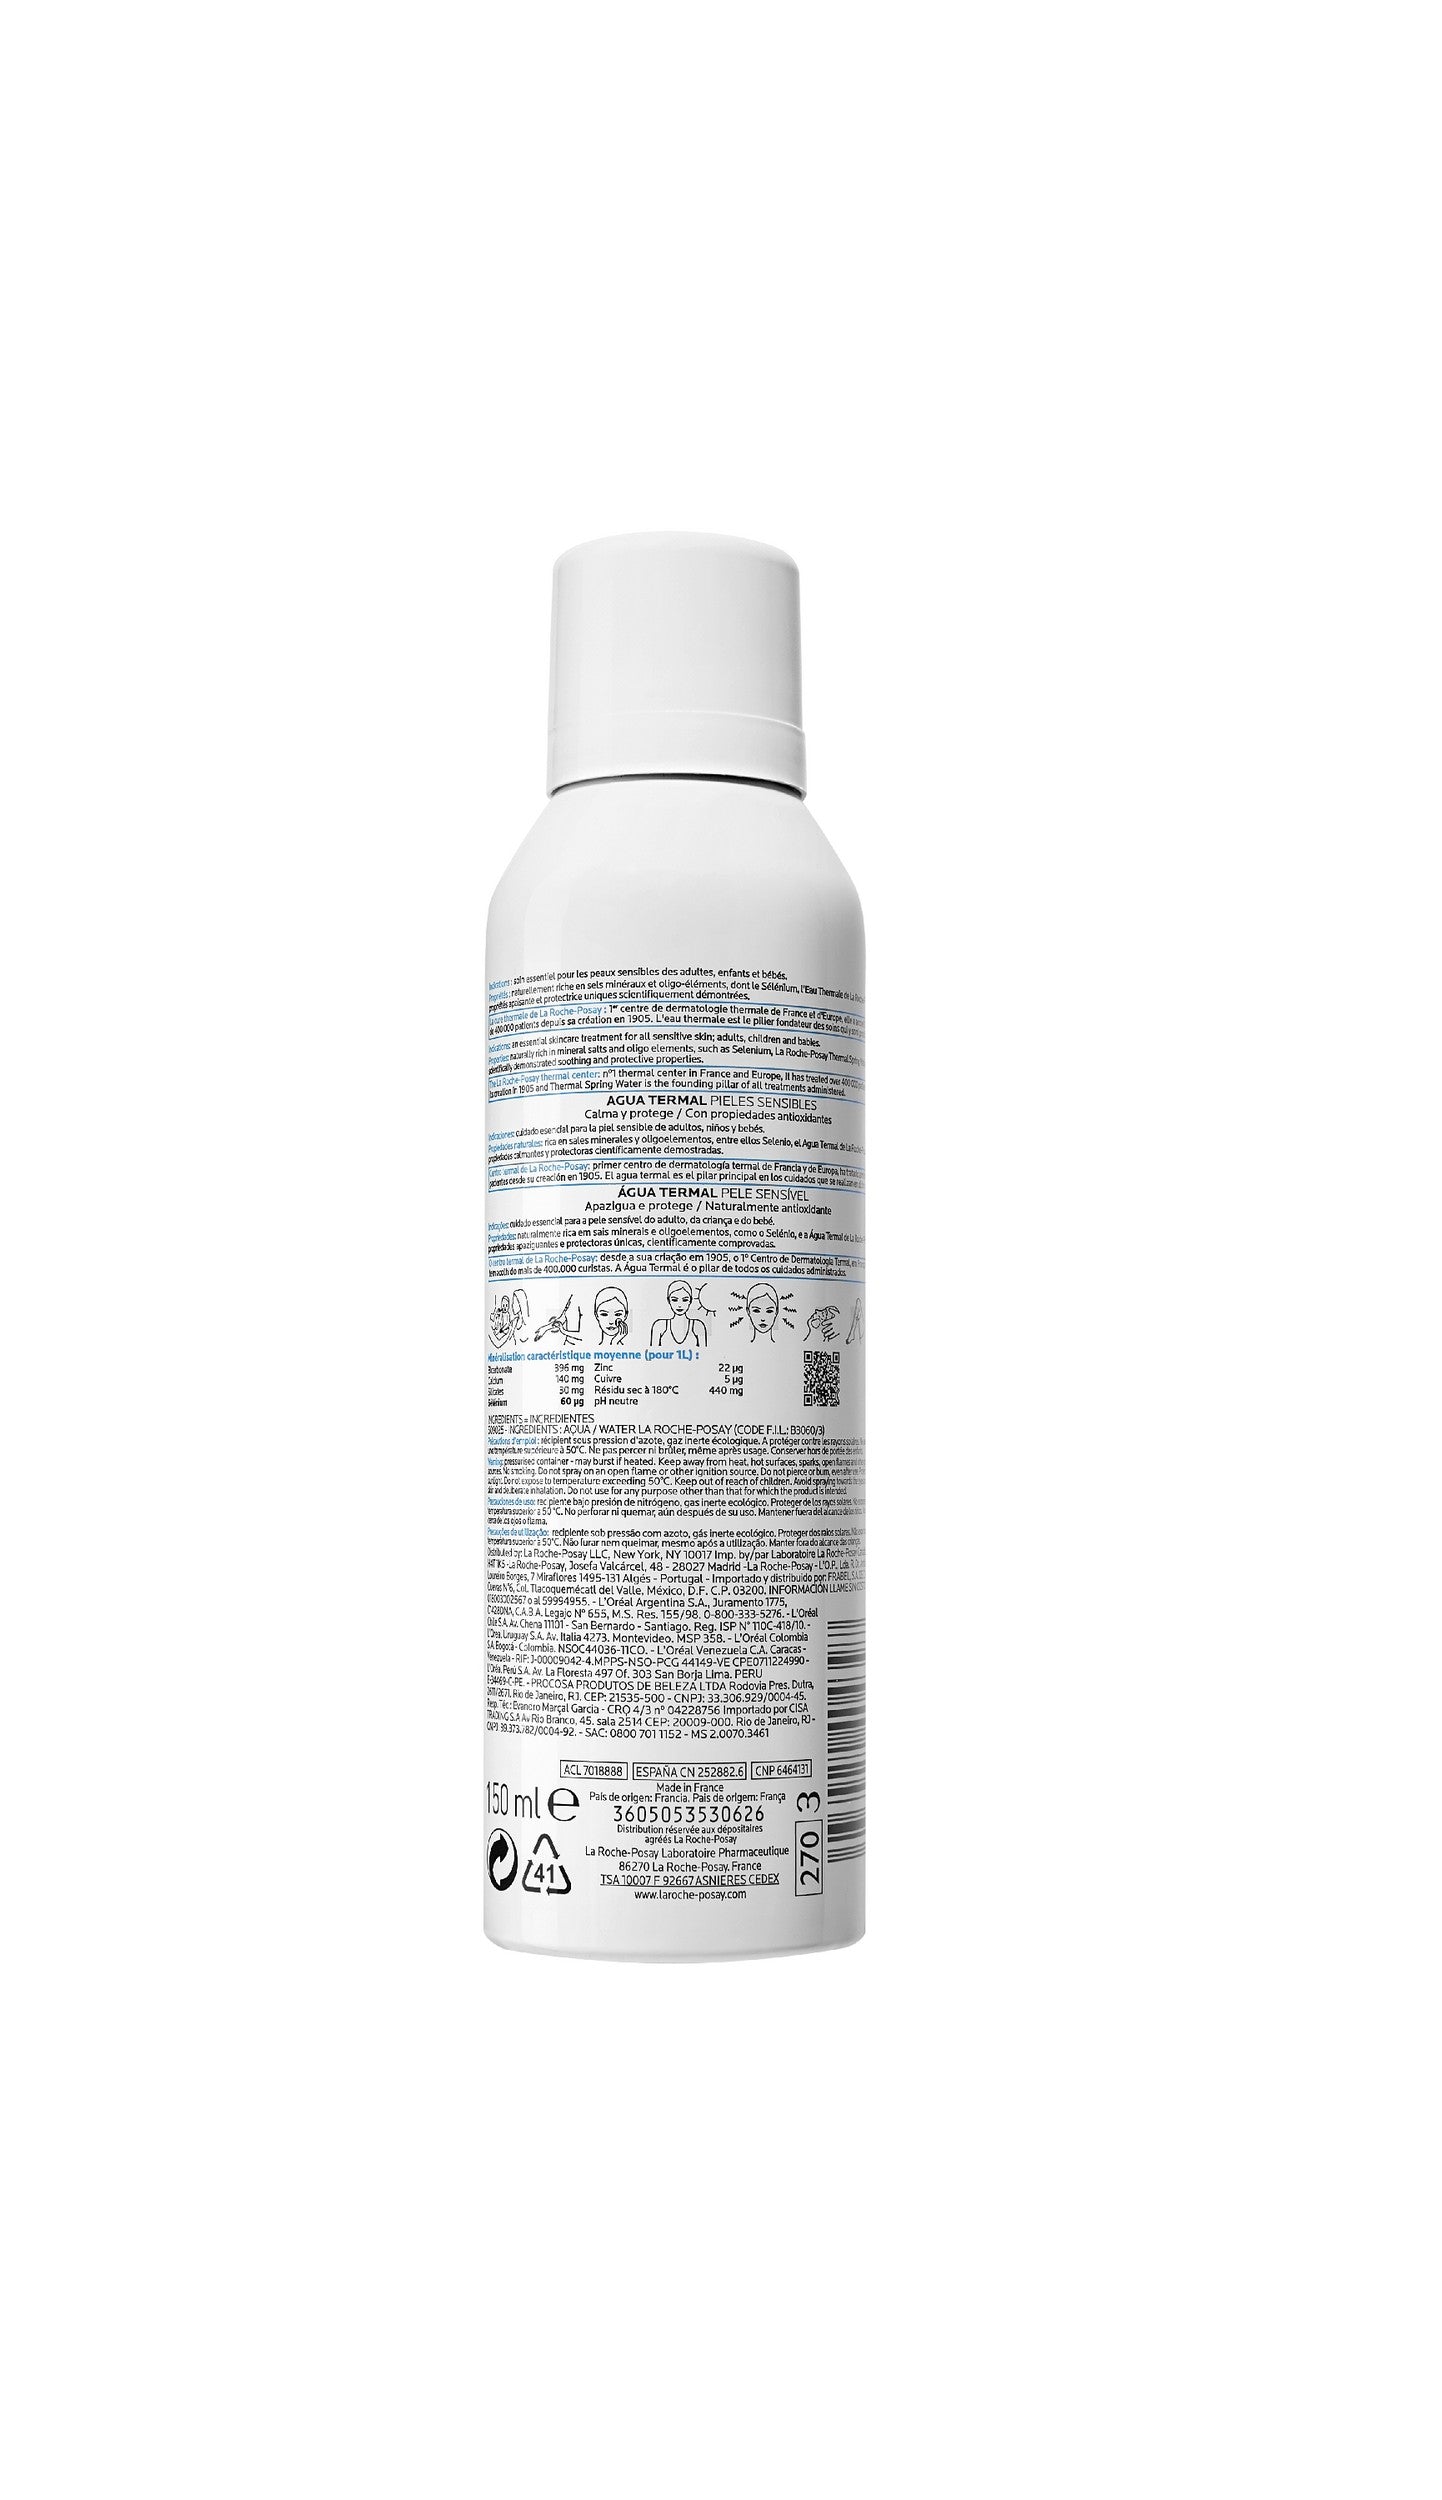 La Roche Posay Thermal Spring Water 150ml back